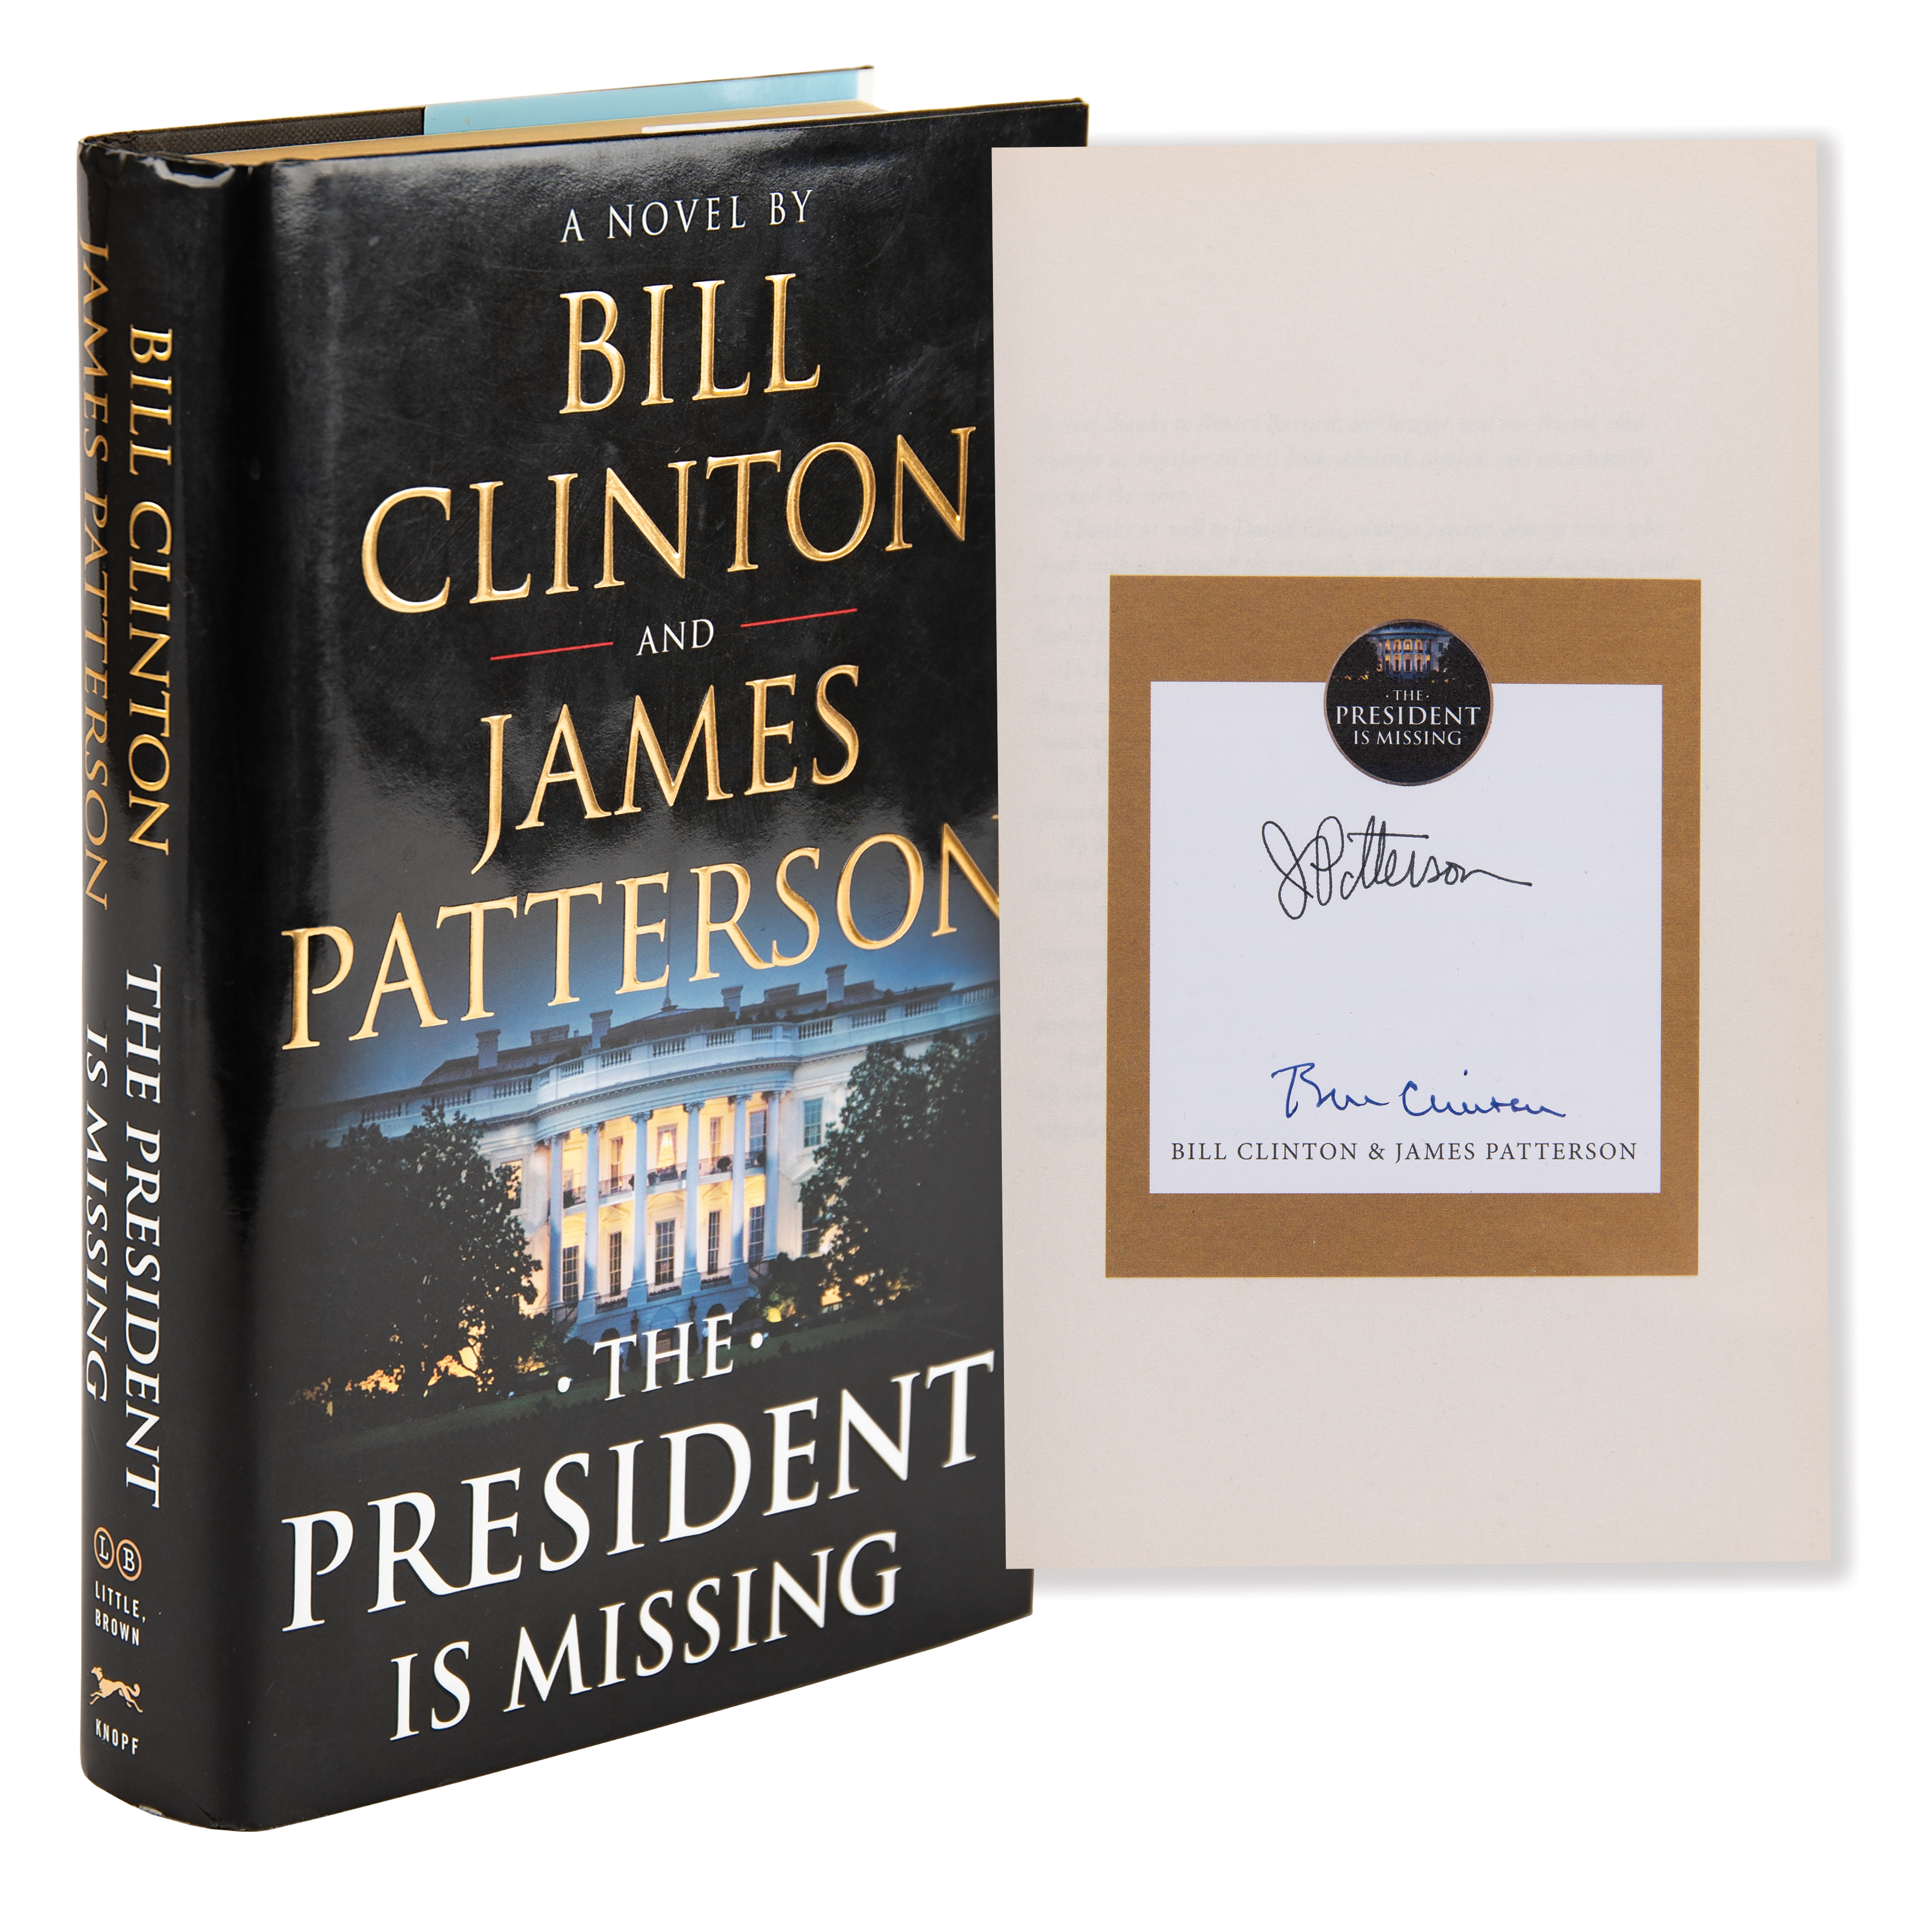 Lot #57 Bill Clinton Signed Book - The President Is Missing - Image 1